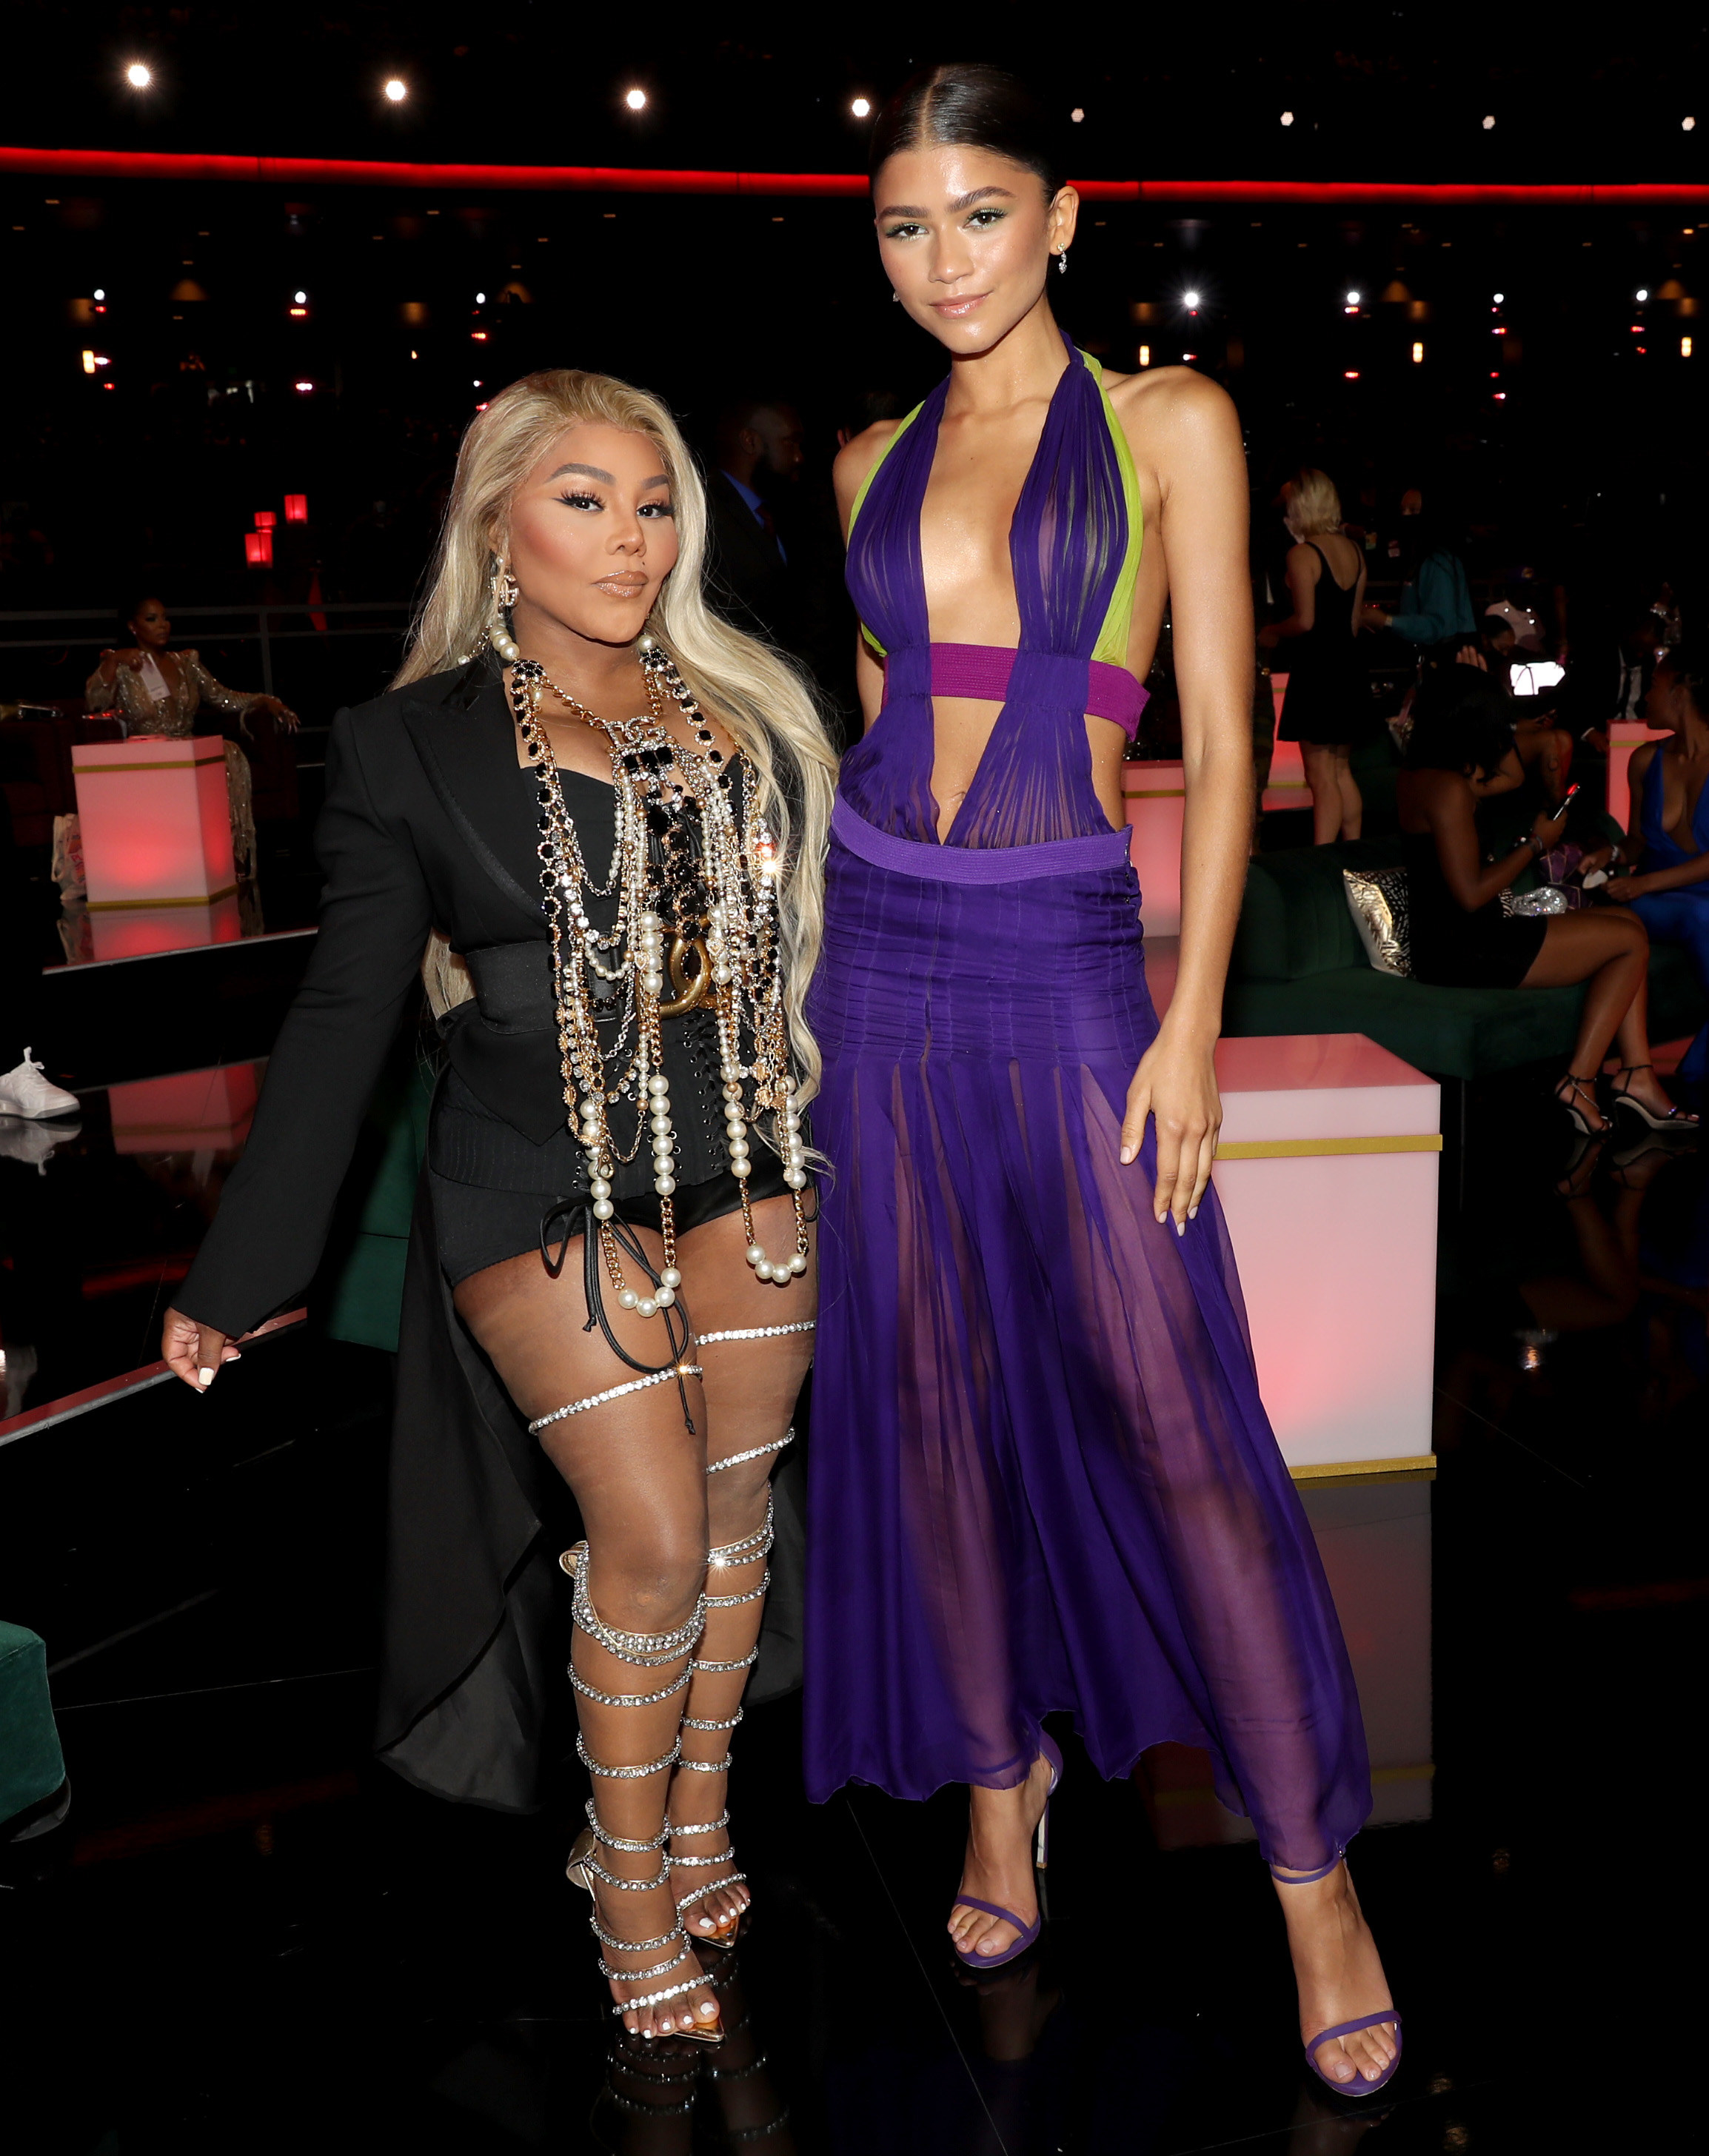 Lil&#x27; Kim and Zendaya (in the purrple dress) attend the BET Awards 2021 at Microsoft Theater on June 27, 2021 in Los Angeles, California